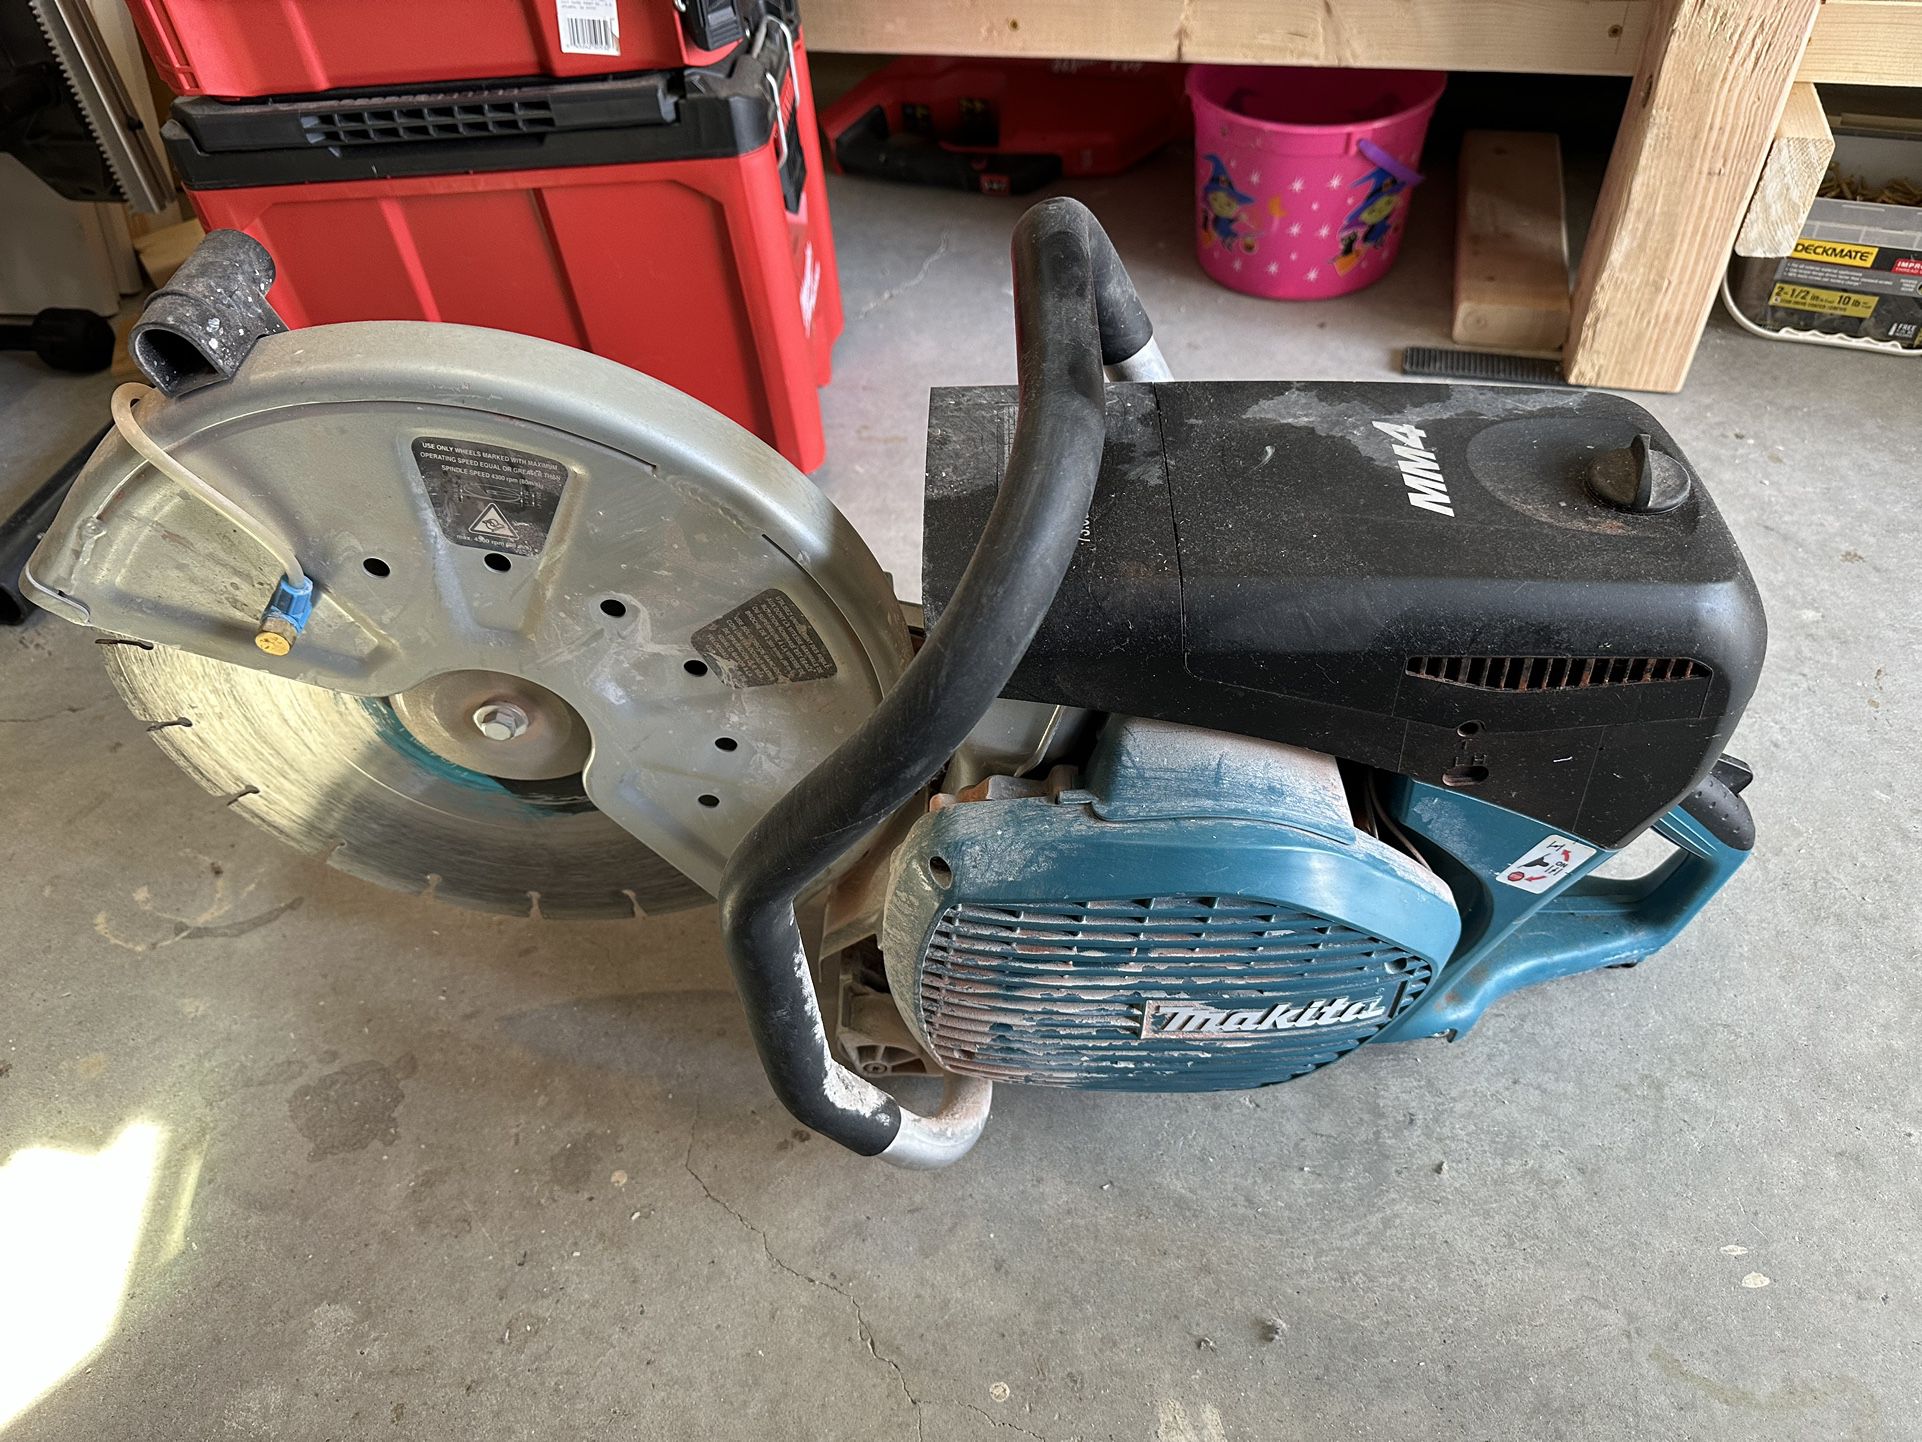 Makita Power Cutter 14 Inch gas powered (used/well-maintained)